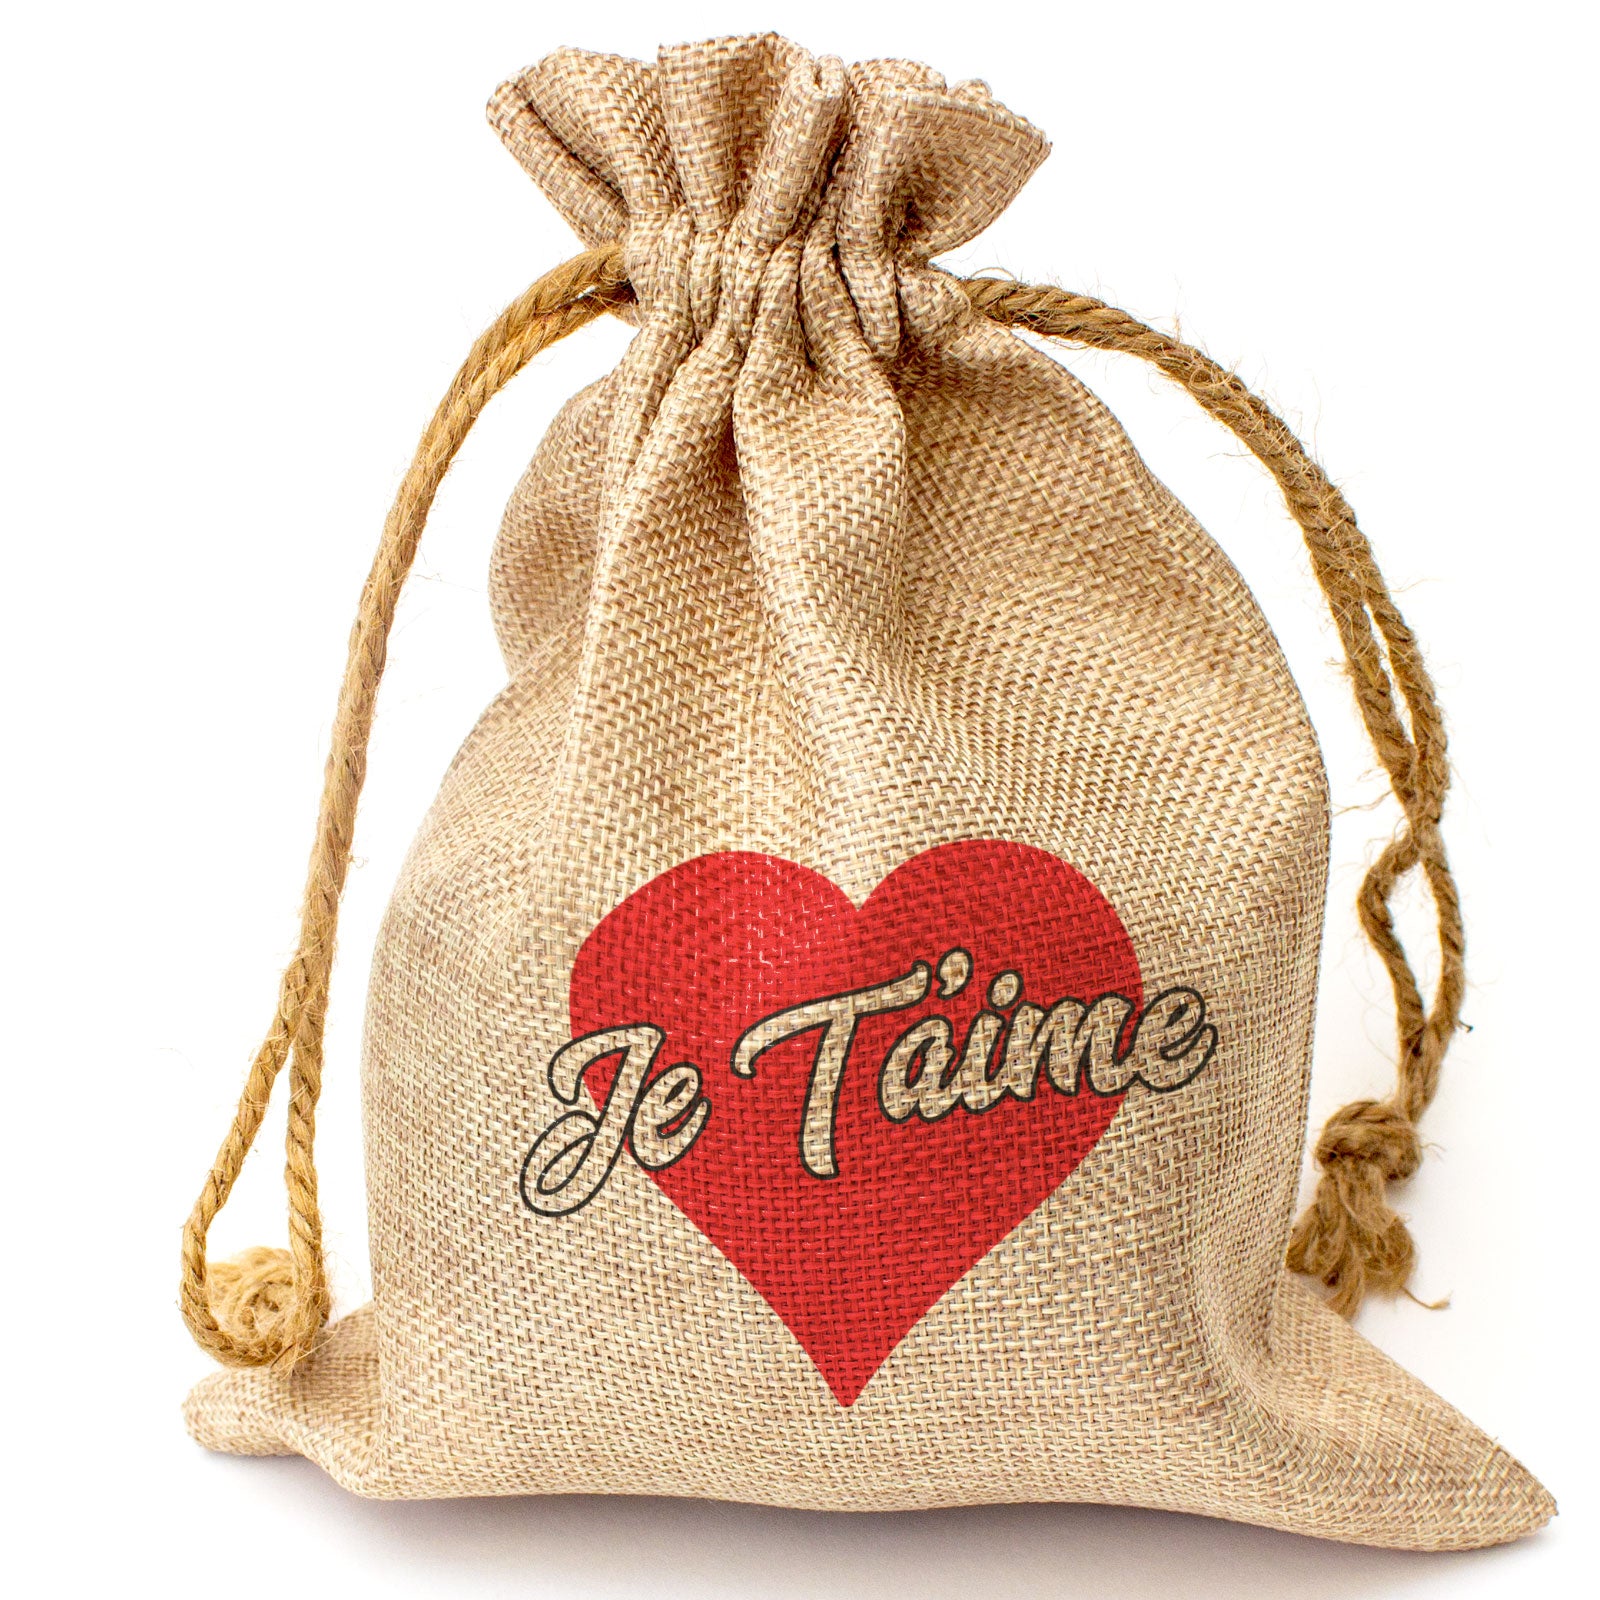 JE T'AIME - Toasted Coconut Bowl Candle – Soy Wax - Gift Present